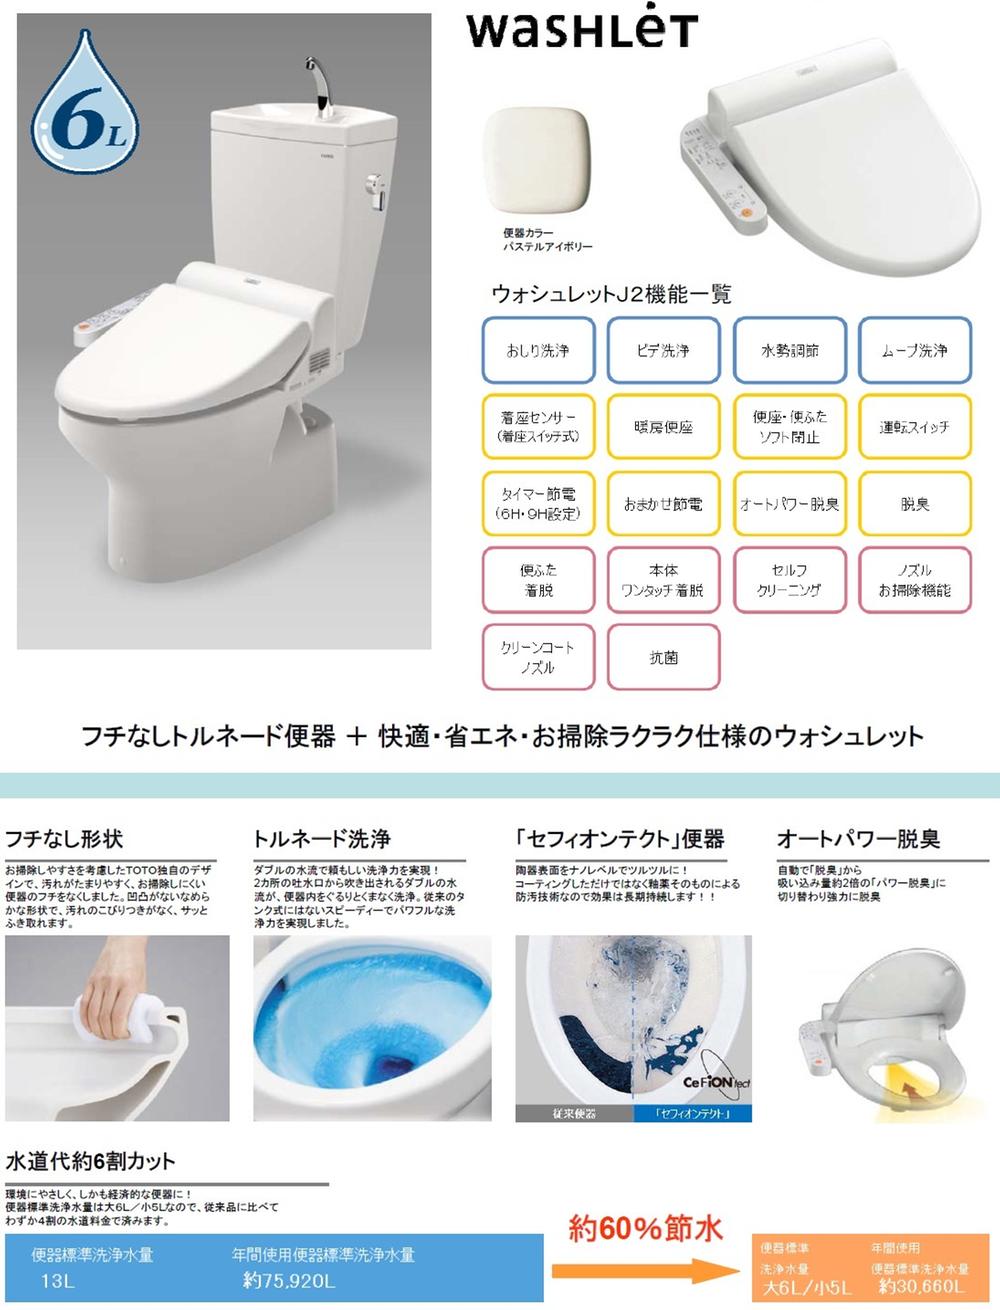 Other Equipment.  ■ Borderless shape in consideration of the cleaning ease ■ Tornado cleaning to wash all over the inside of the toilet bowl in the double of water flow ■ The pottery surface was coated in slippery at the nano-level "Sefi on Detect" toilet bowl ■ Automatically from "deodorizing", Deodorizing in cooperation switches to suction weight of about 2 times the "power deodorizing"